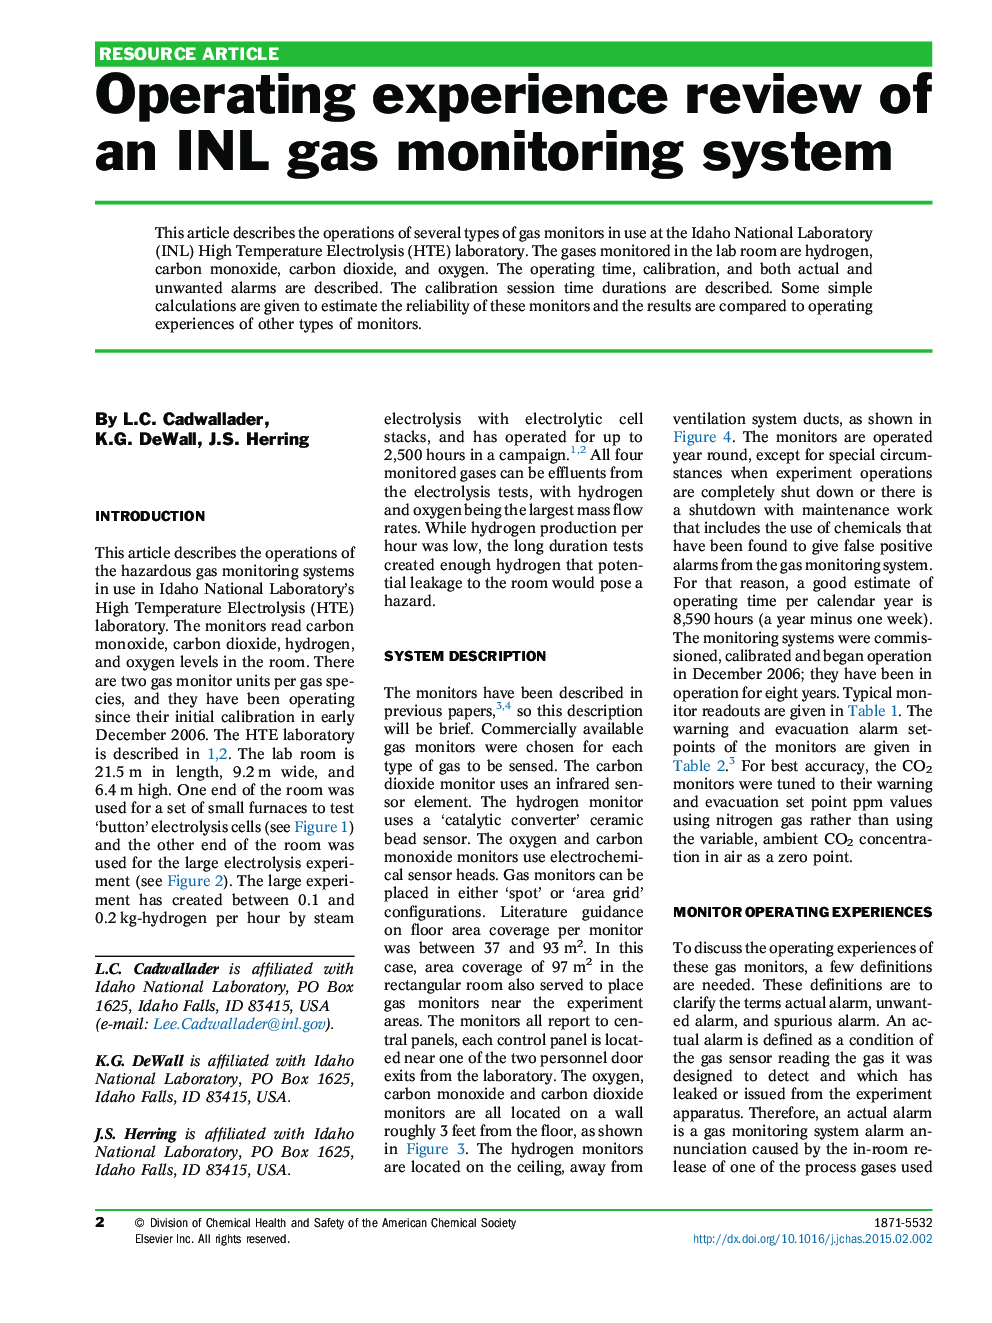 Operating experience review of an INL gas monitoring system